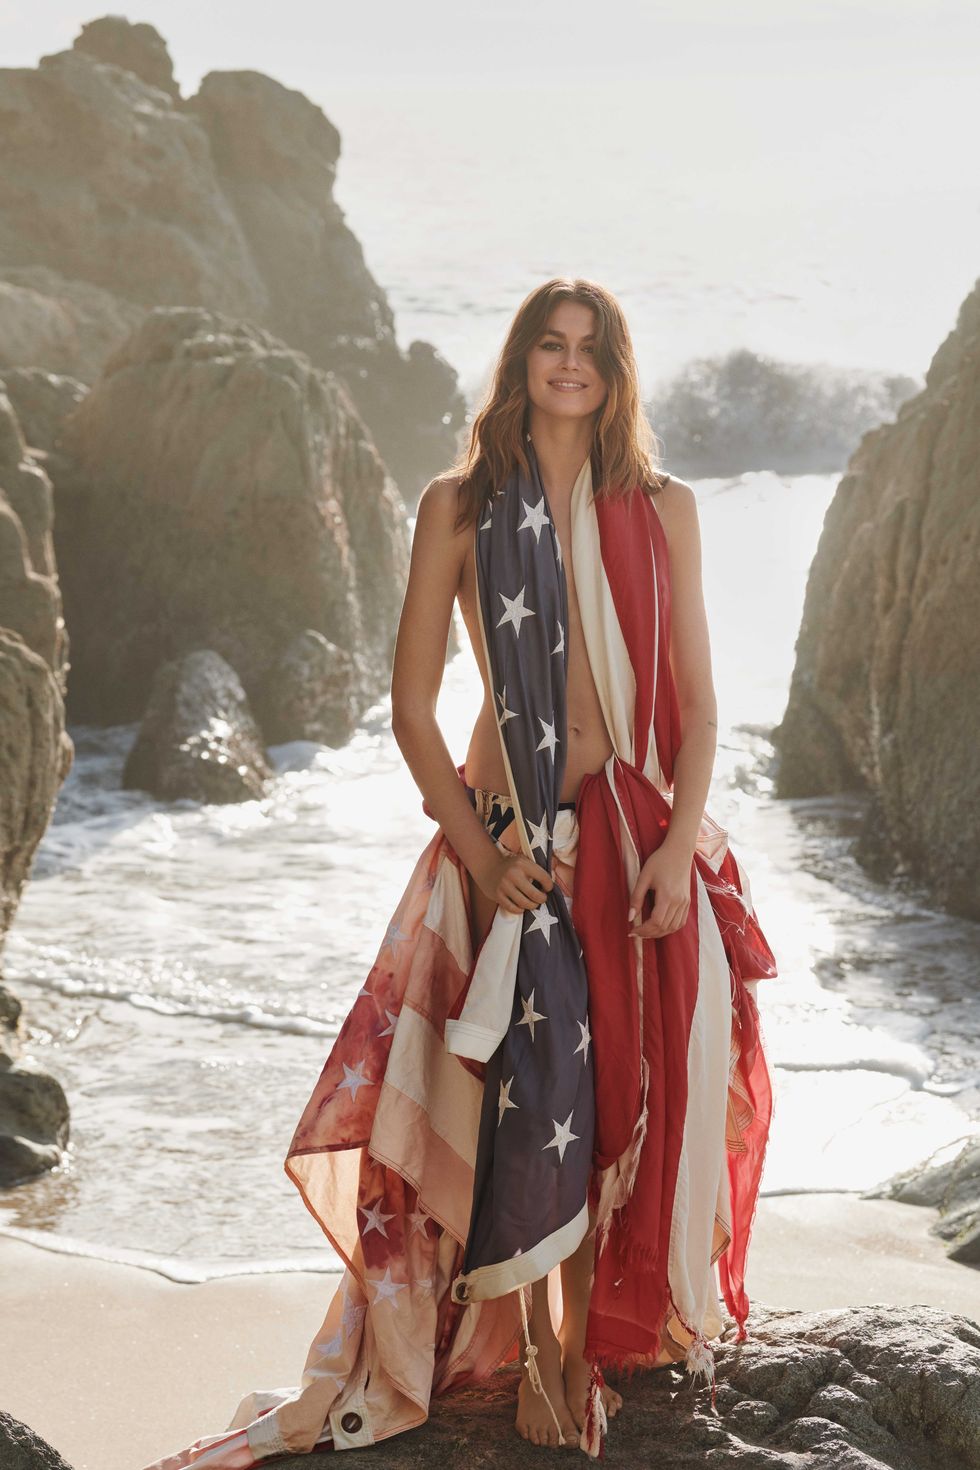 a white brunette woman stands on a beach shoreline wearing an american flag gown